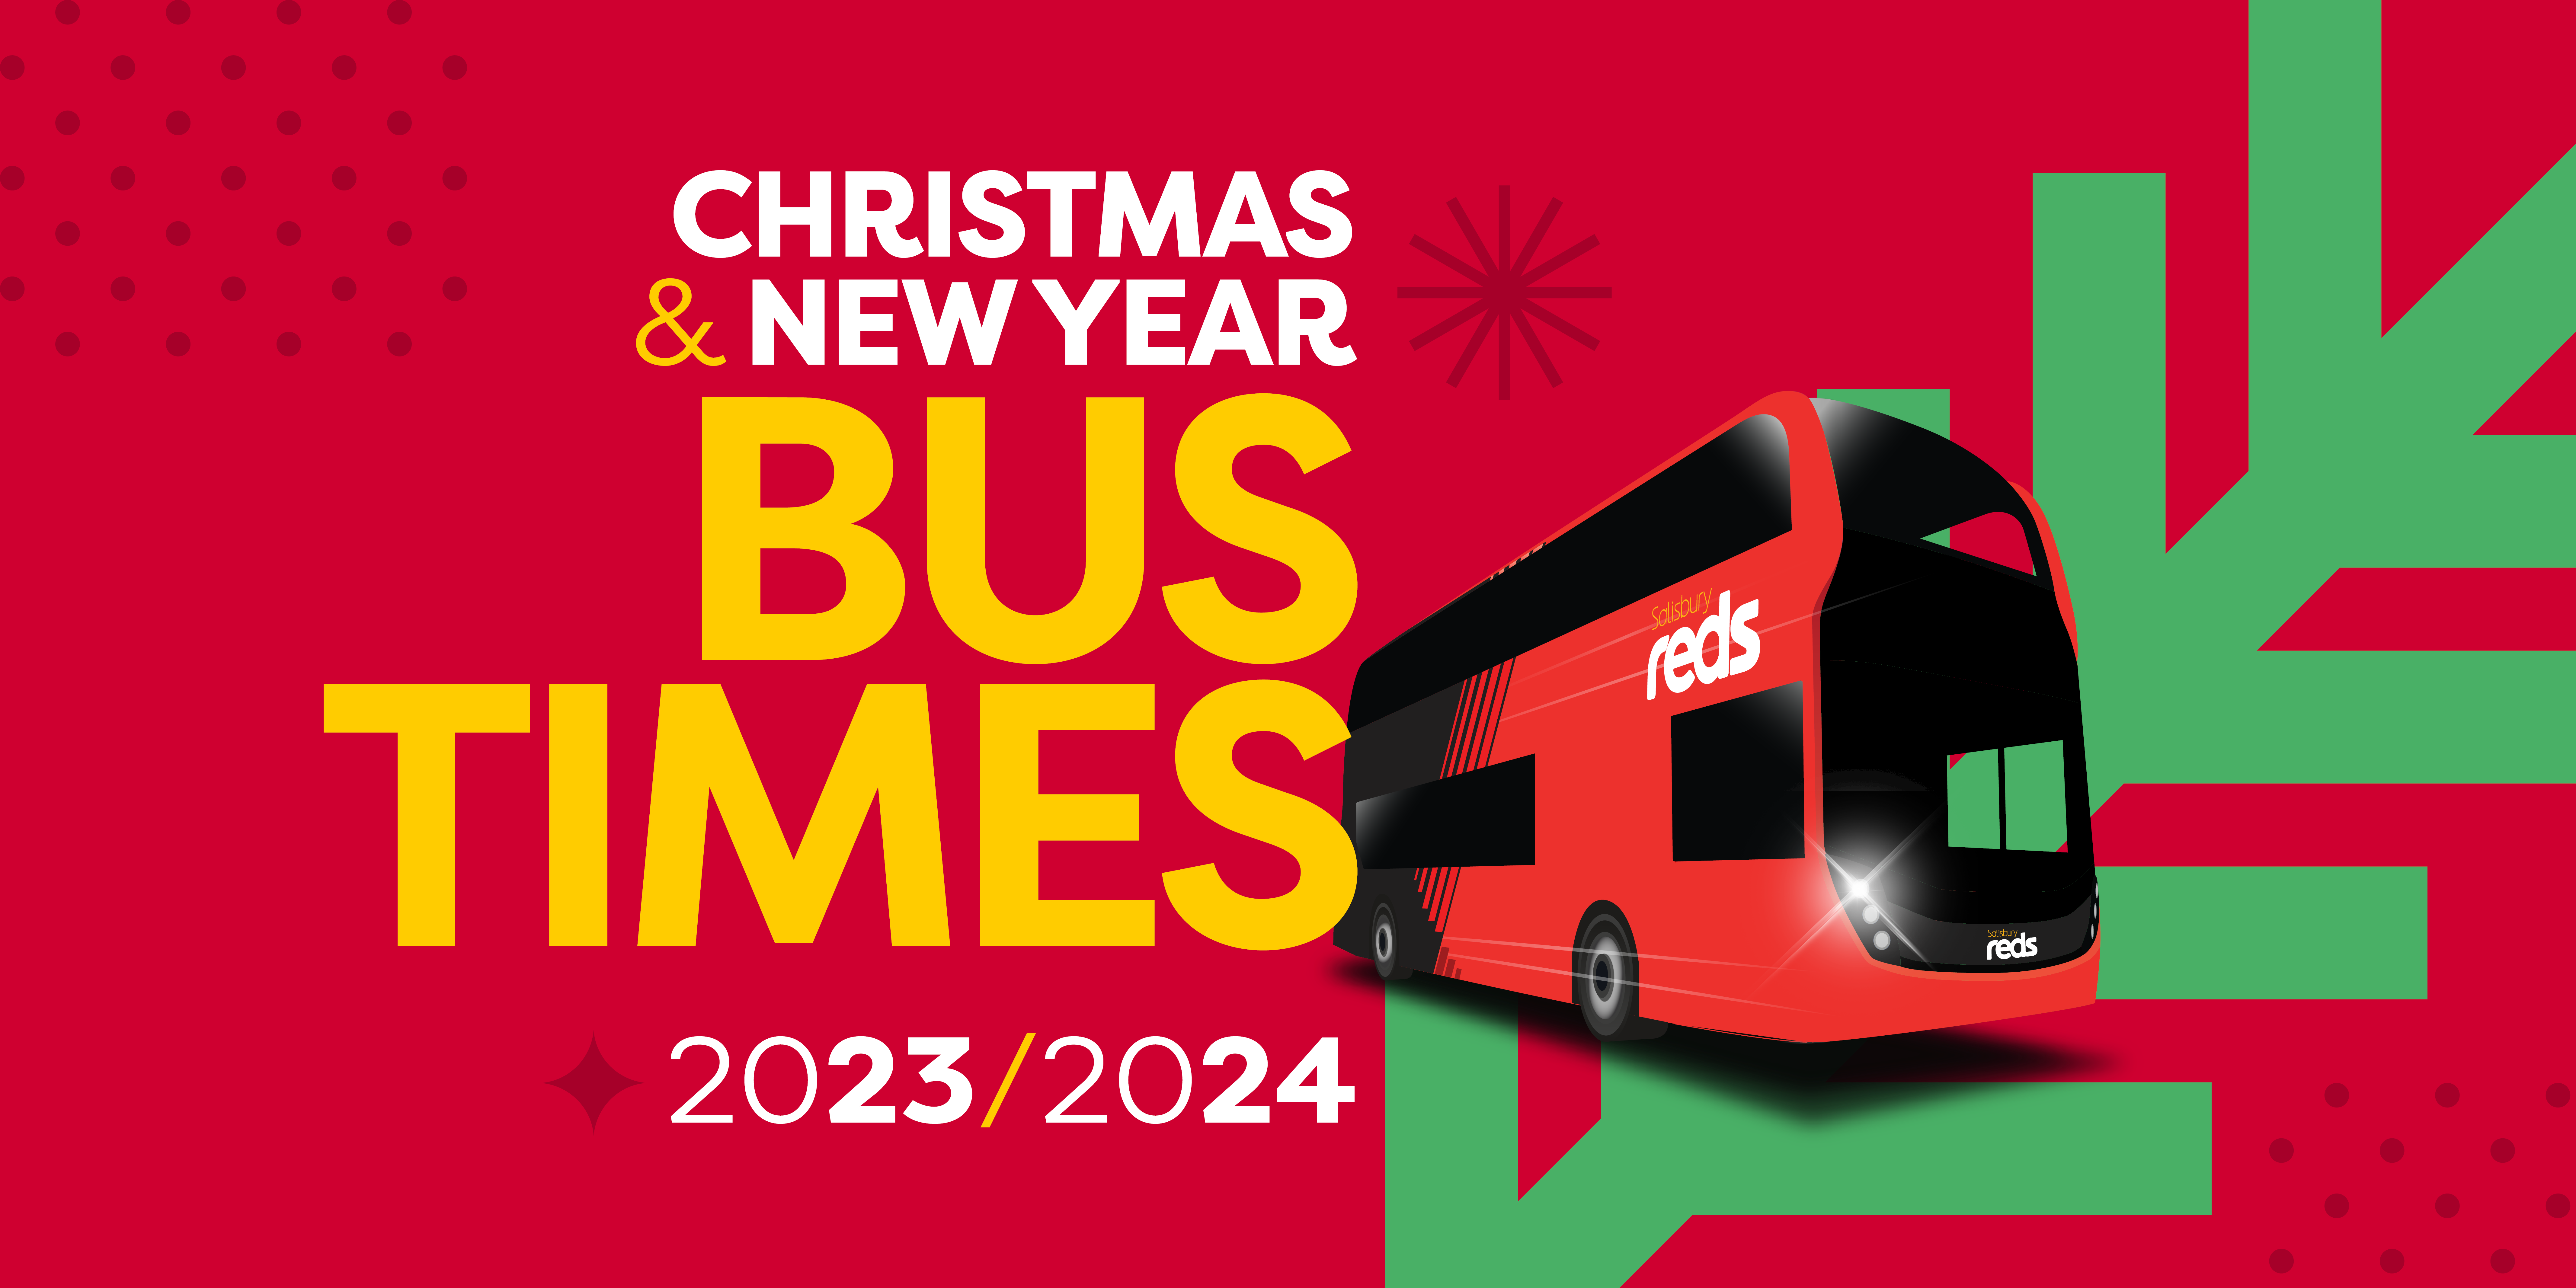 Christmas & New Year bus times